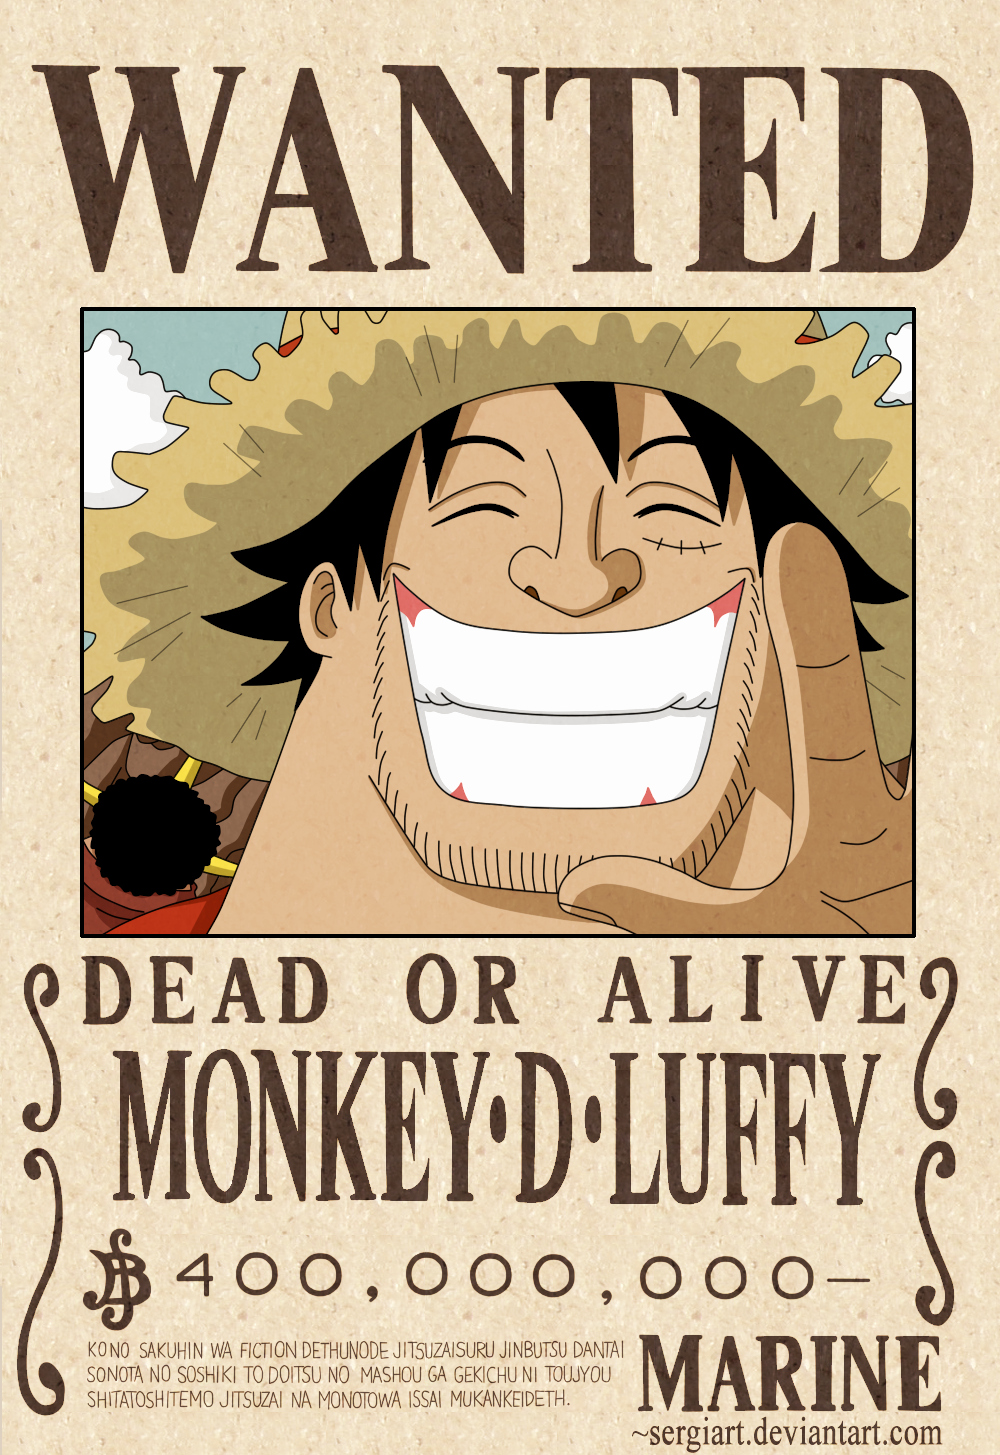 Monkey D Luffy Wanted Poster Fresh Monkey D Luffy Wanted Poster by Sergiart On Deviantart